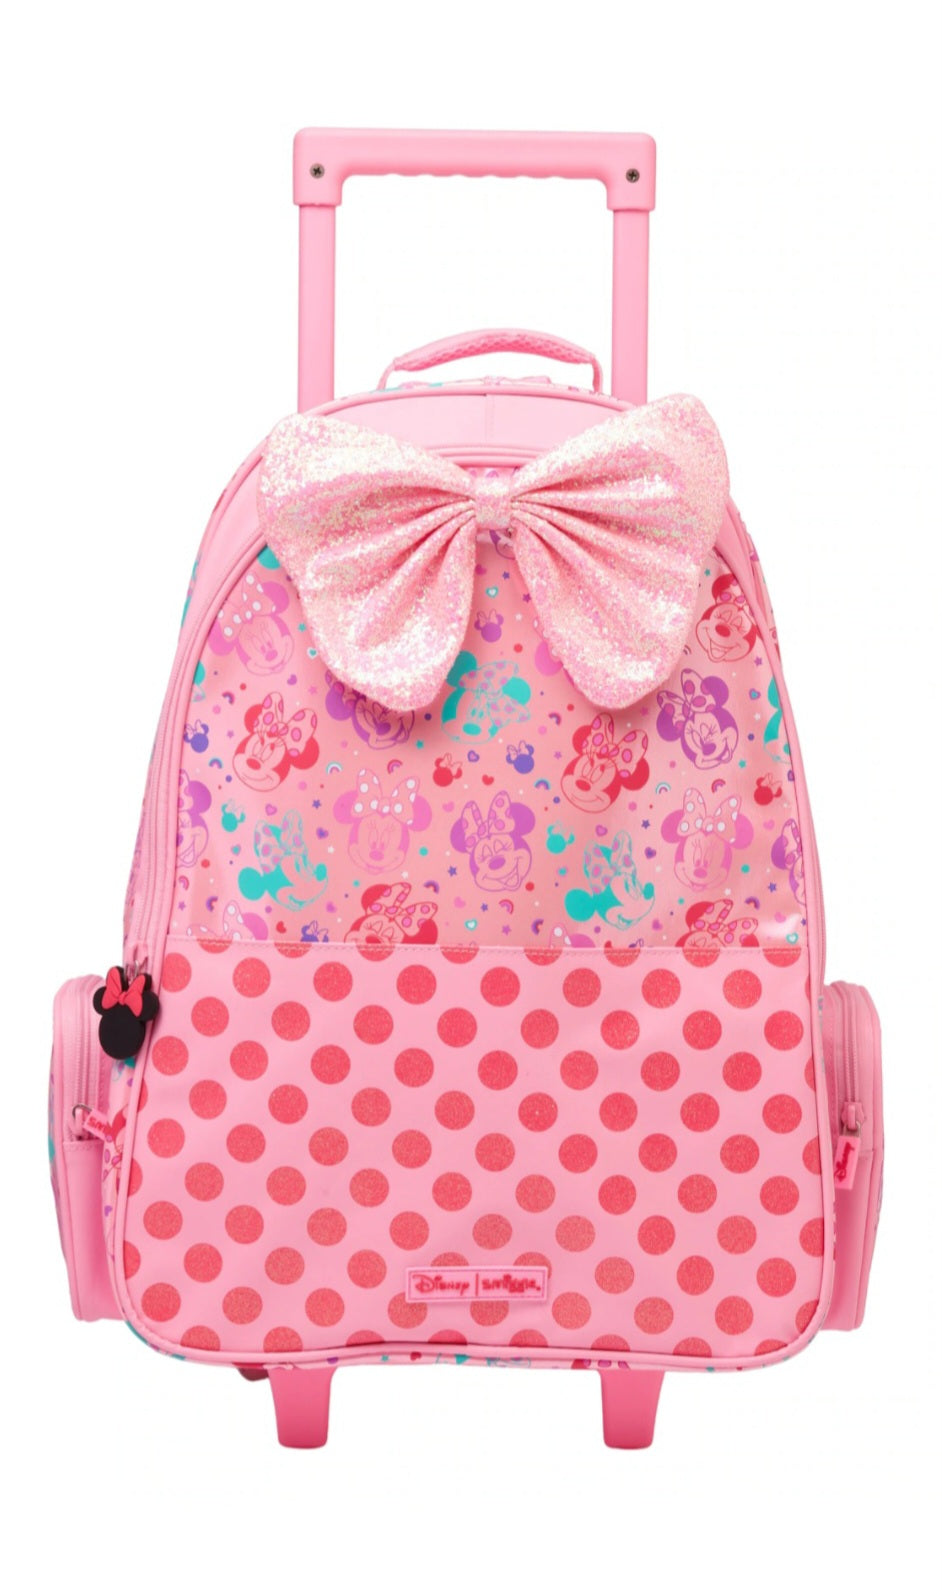 Minnie Mouse Trolley Backpack With Light Up Wheels